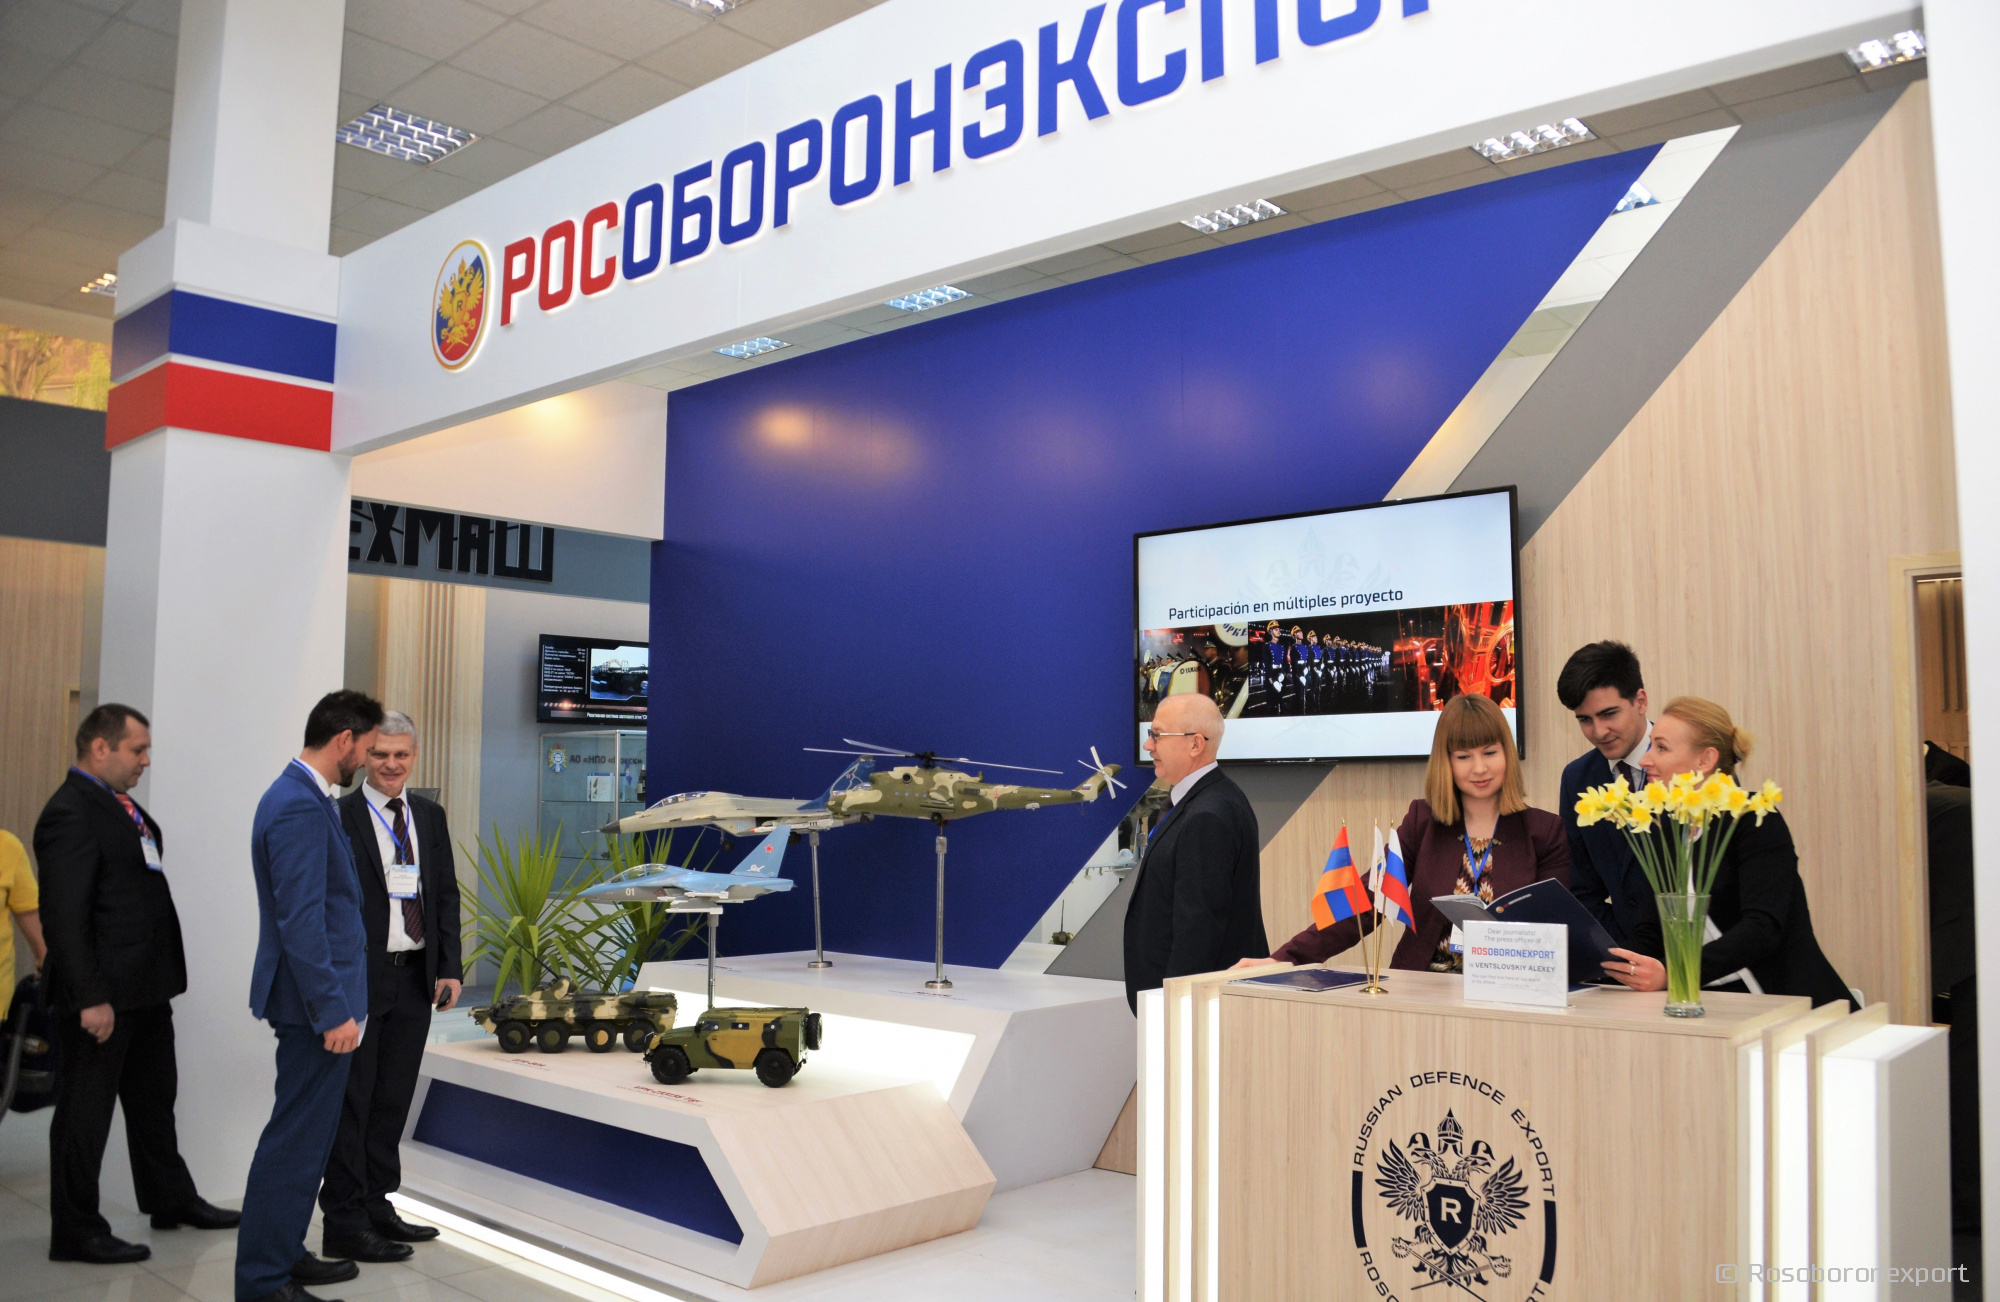 Russia to Present State-of-the-Art Armaments and Security Equipment at the ArmHiTec 2018 Exhibition